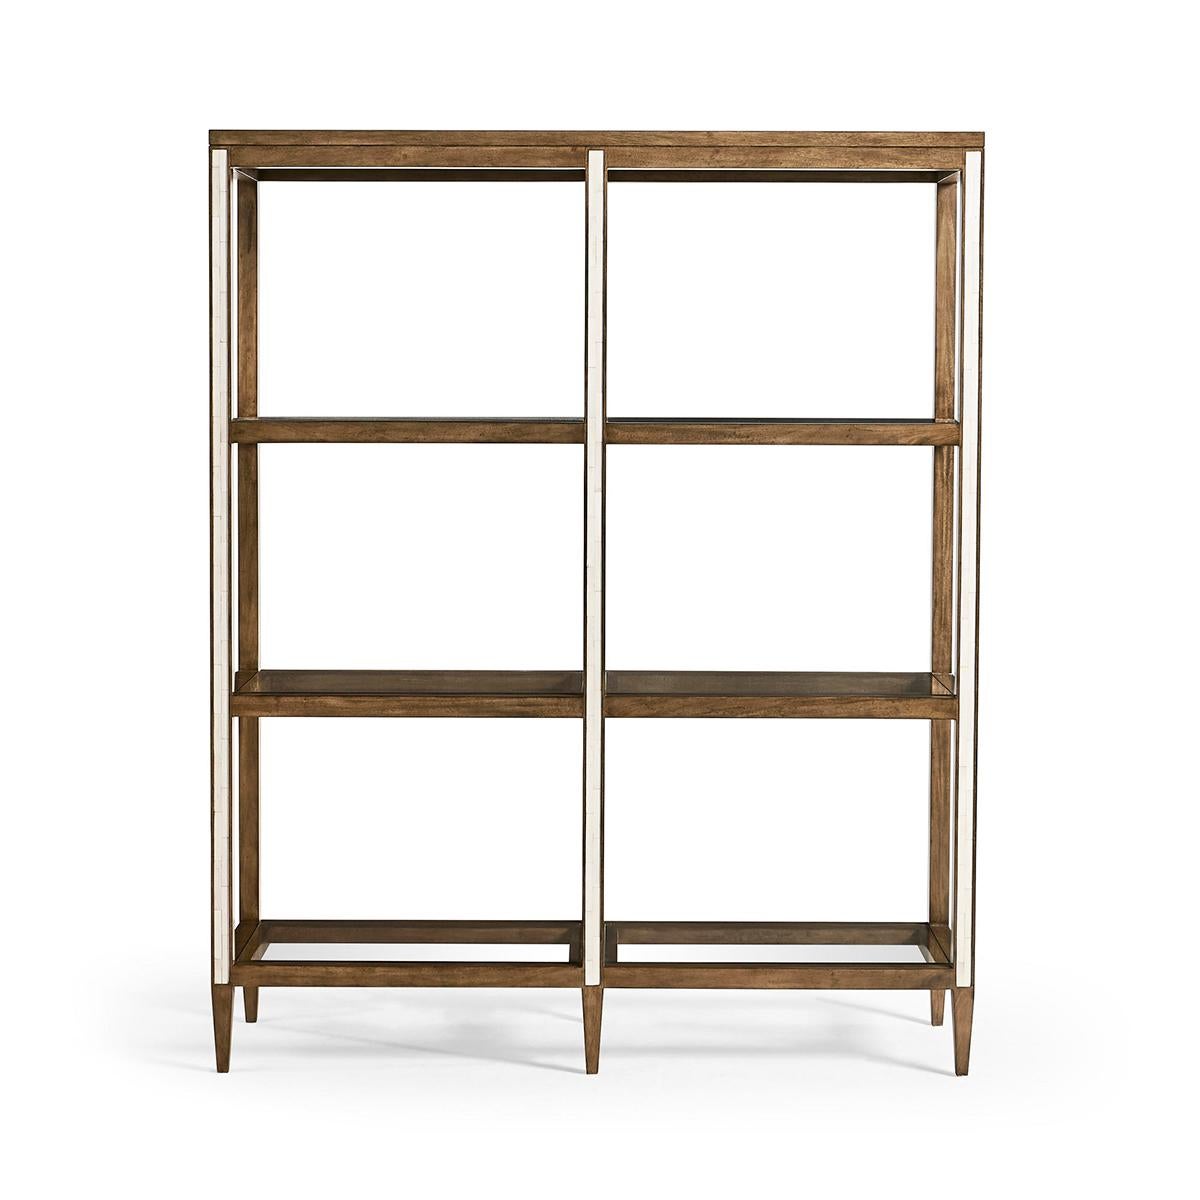 The front and back rails of this etagere feature a faux bone inlay that adds an intricate and tactile dimension to the piece. With three framed glass shelves, this etagere provides ample space for displaying your favorite items.

Whether placed in a